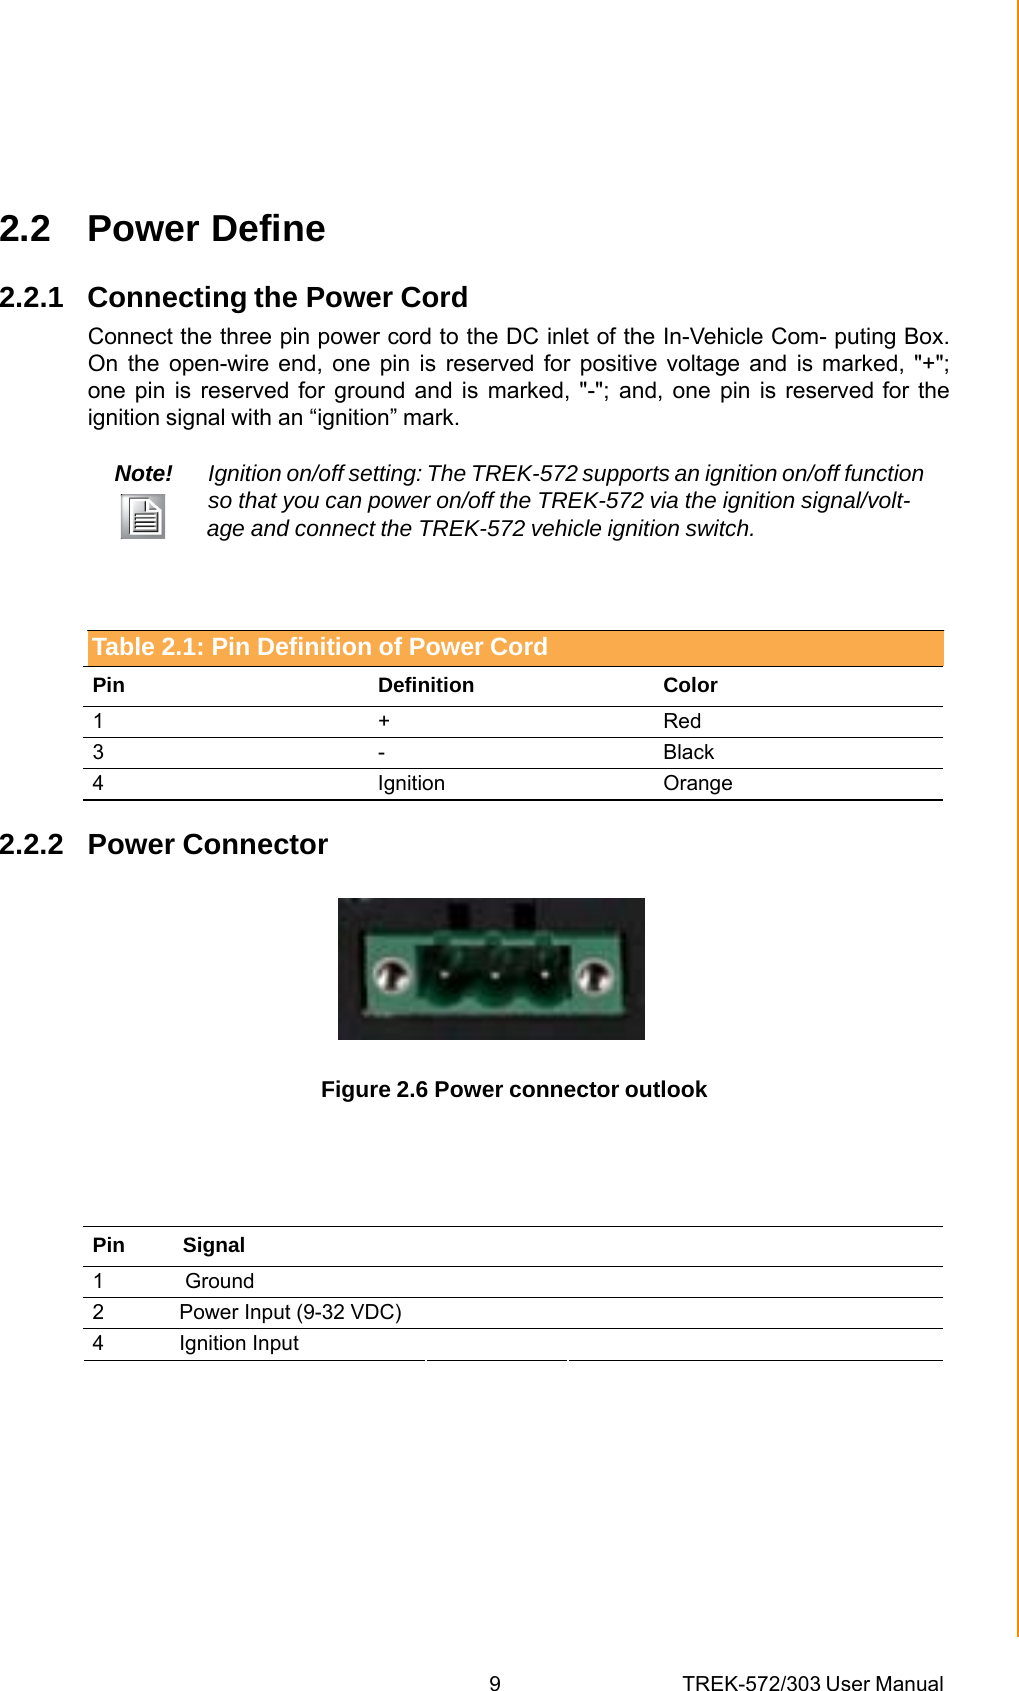 9 TREK-572/303 User ManualChapter 2 System Setup2.2 Power Define 2.2.1 Connecting the Power Cord Connect the three pin power cord to the DC inlet of the In-Vehicle Com- puting Box. On the open-wire end, one pin is reserved for positive voltage and is marked, &quot;+&quot;; one pin is reserved for ground and is marked, &quot;-&quot;; and, one pin is reserved for the ignition signal with an “ignition” mark. Note!  Ignition on/off setting: The TREK-572 supports an ignition on/off function so that you can power on/off the TREK-572 via the ignition signal/volt-         age and connect the TREK-572 vehicle ignition switch. Table 2.1: Pin Definition of Power Cord Pin Definition Color 1 + Red 3 -  Black 4 Ignition Orange 2.2.2 Power Connector  Figure 2.6 Power connector outlook Table 2.1: Pin Definition of Power Cord Pin          Signal      1              Ground       2             Power Input (9-32 VDC)            4             Ignition Input       